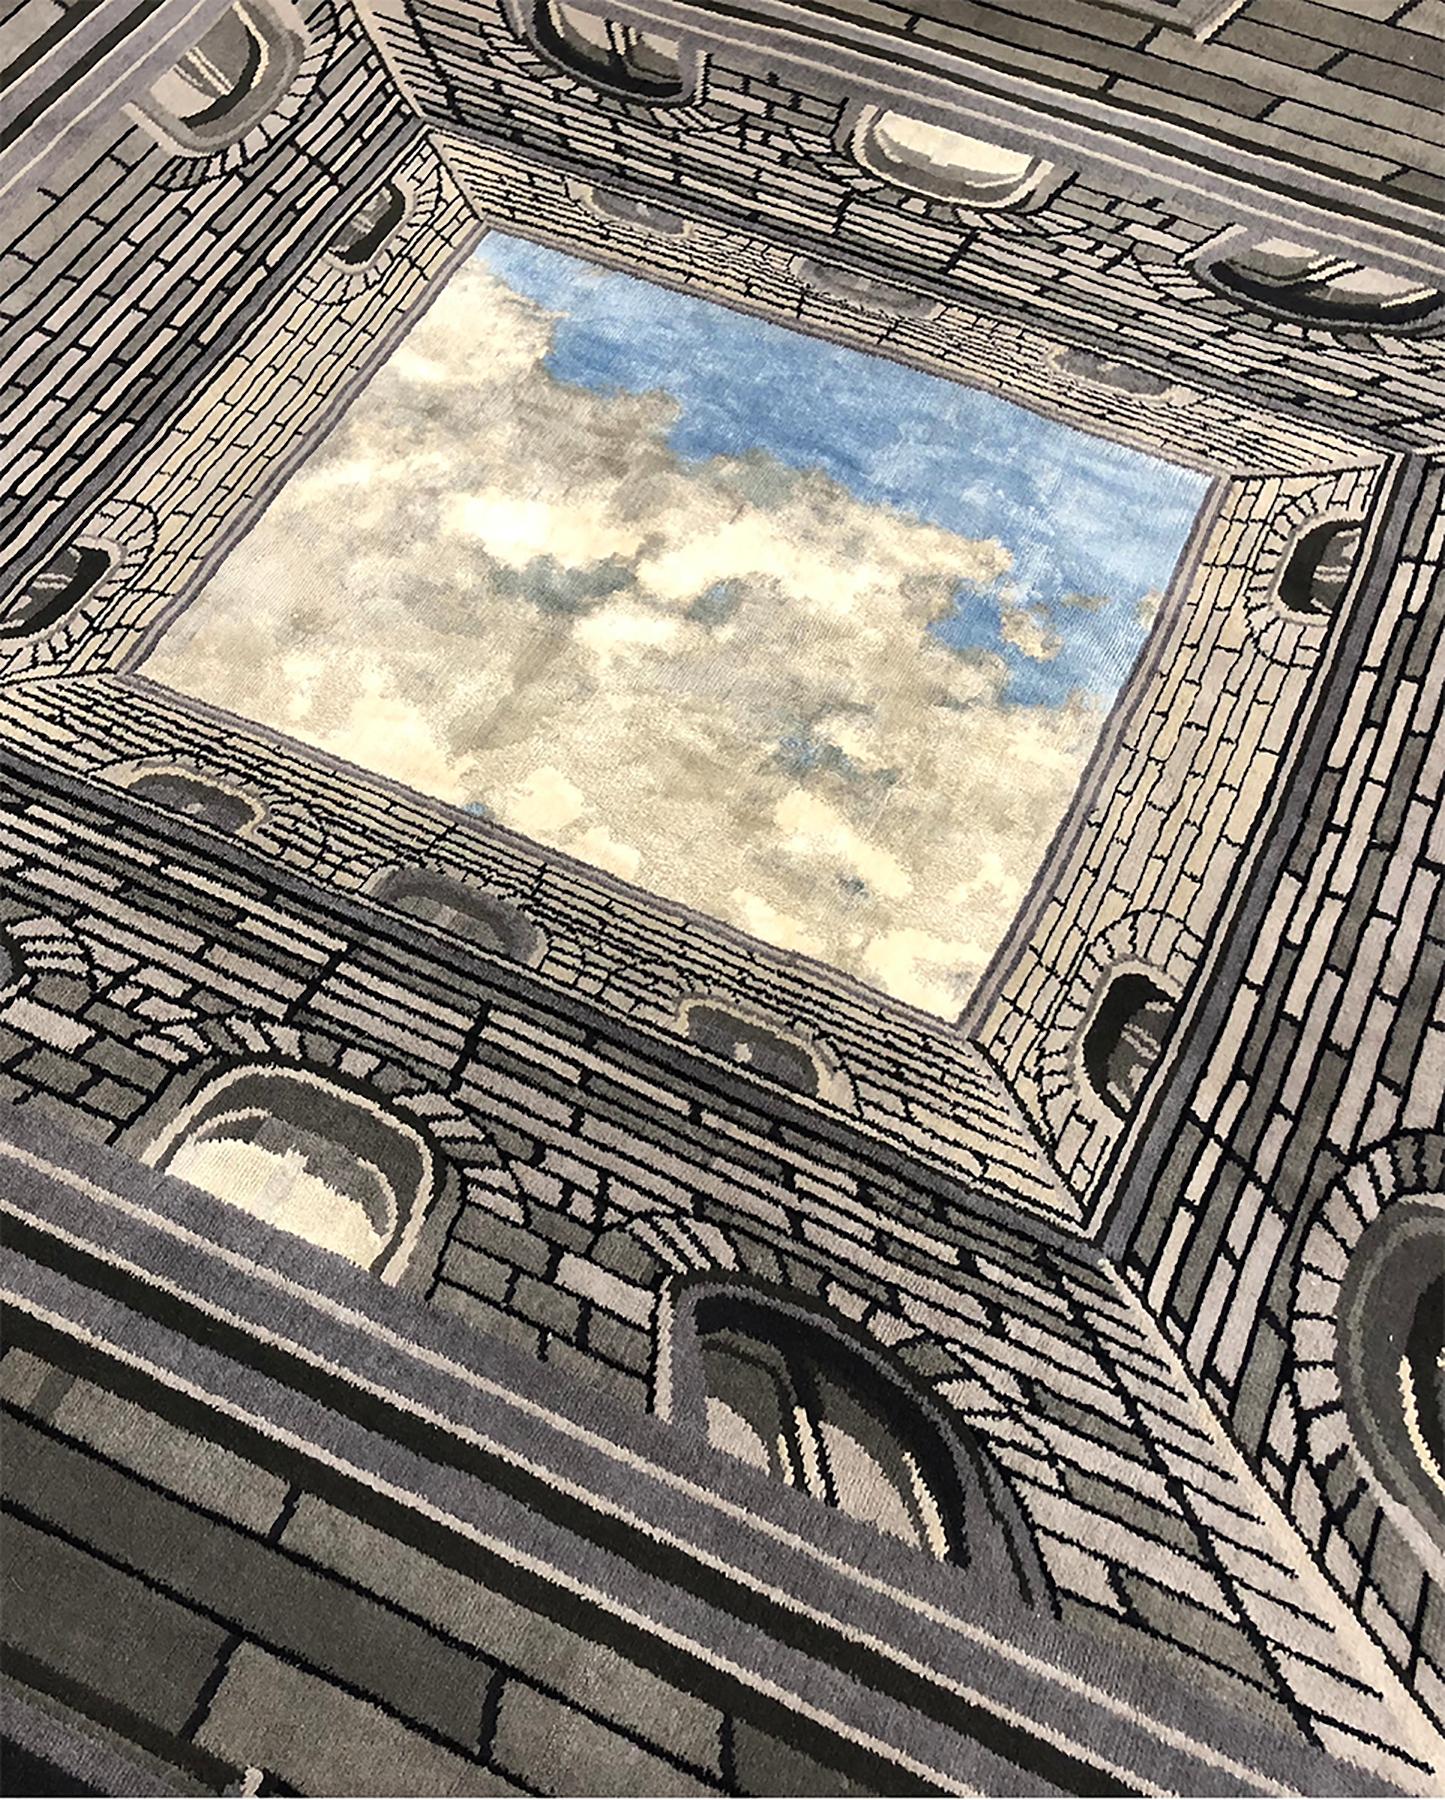 Inspired by the complex and refined creations of Baroque master architect Filippo Brunelleschi, Fabio Novembre designed this stunning rug boasting a magnificent trompe l'oeil with an open skyline at its center. This work of art is knotted by hand in